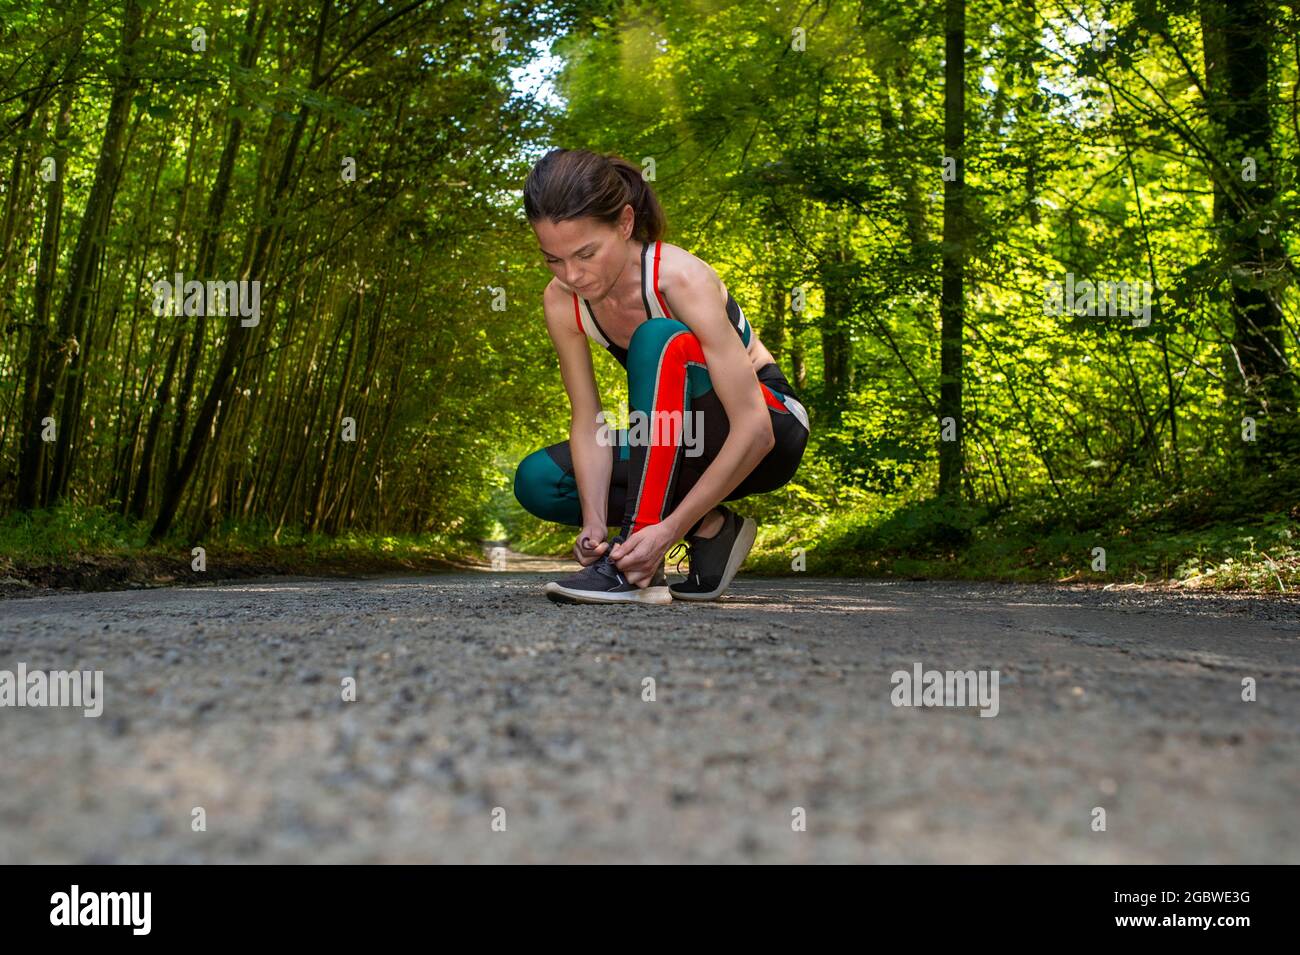 Woman runner tying shoelaces Stock Photo